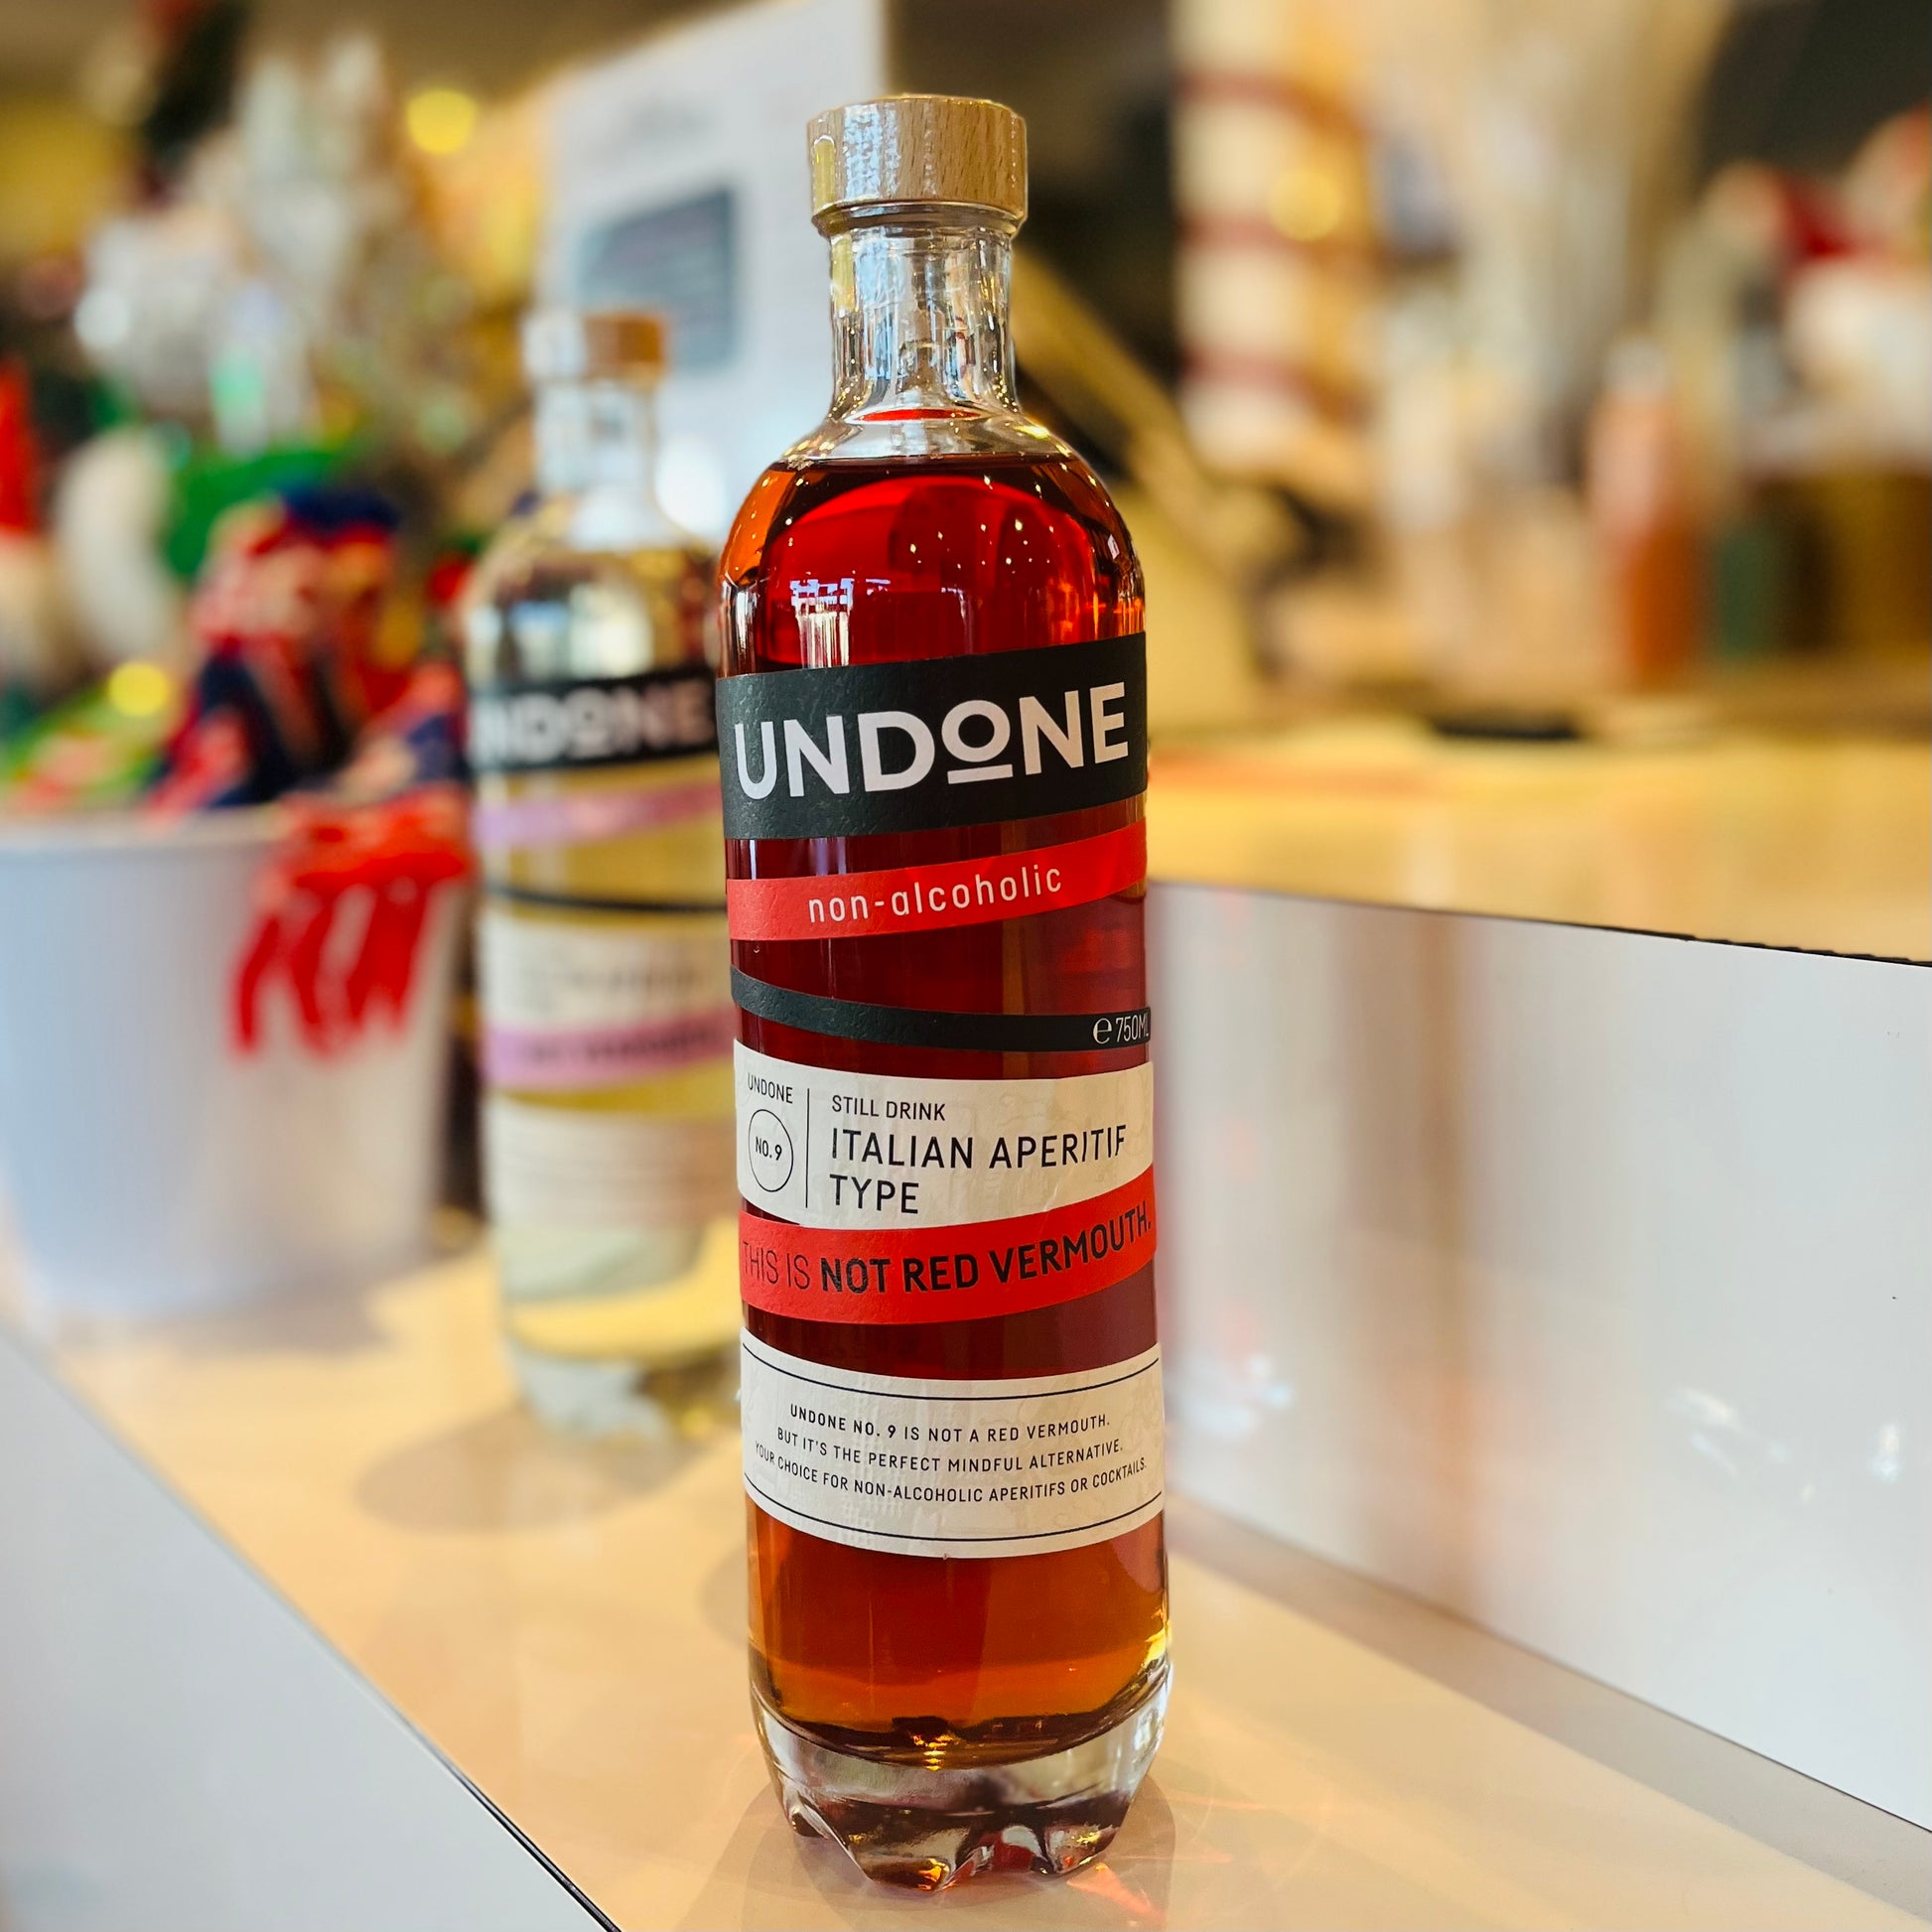 UNDONE NOT VERMOUTH – RED The NON-ALCOHOLIC Pourium